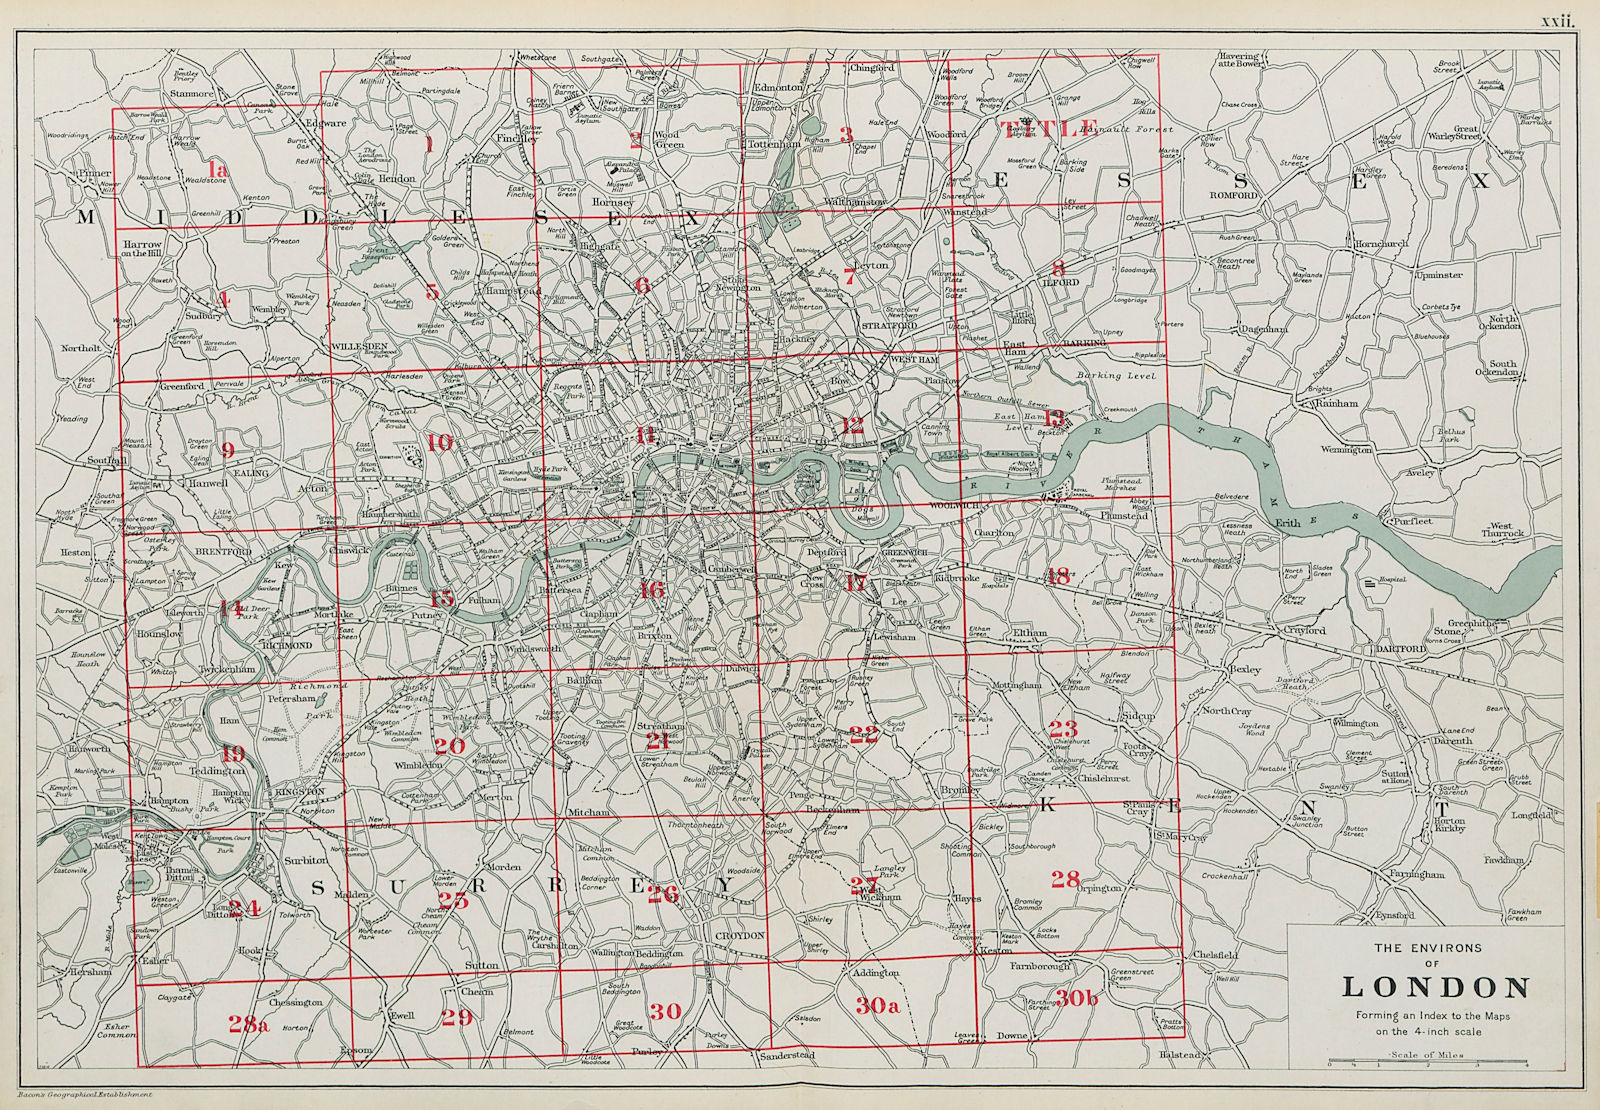 Associate Product THE ENVIRONS OF LONDON. Index map. Main roads. BACON 1913 old antique